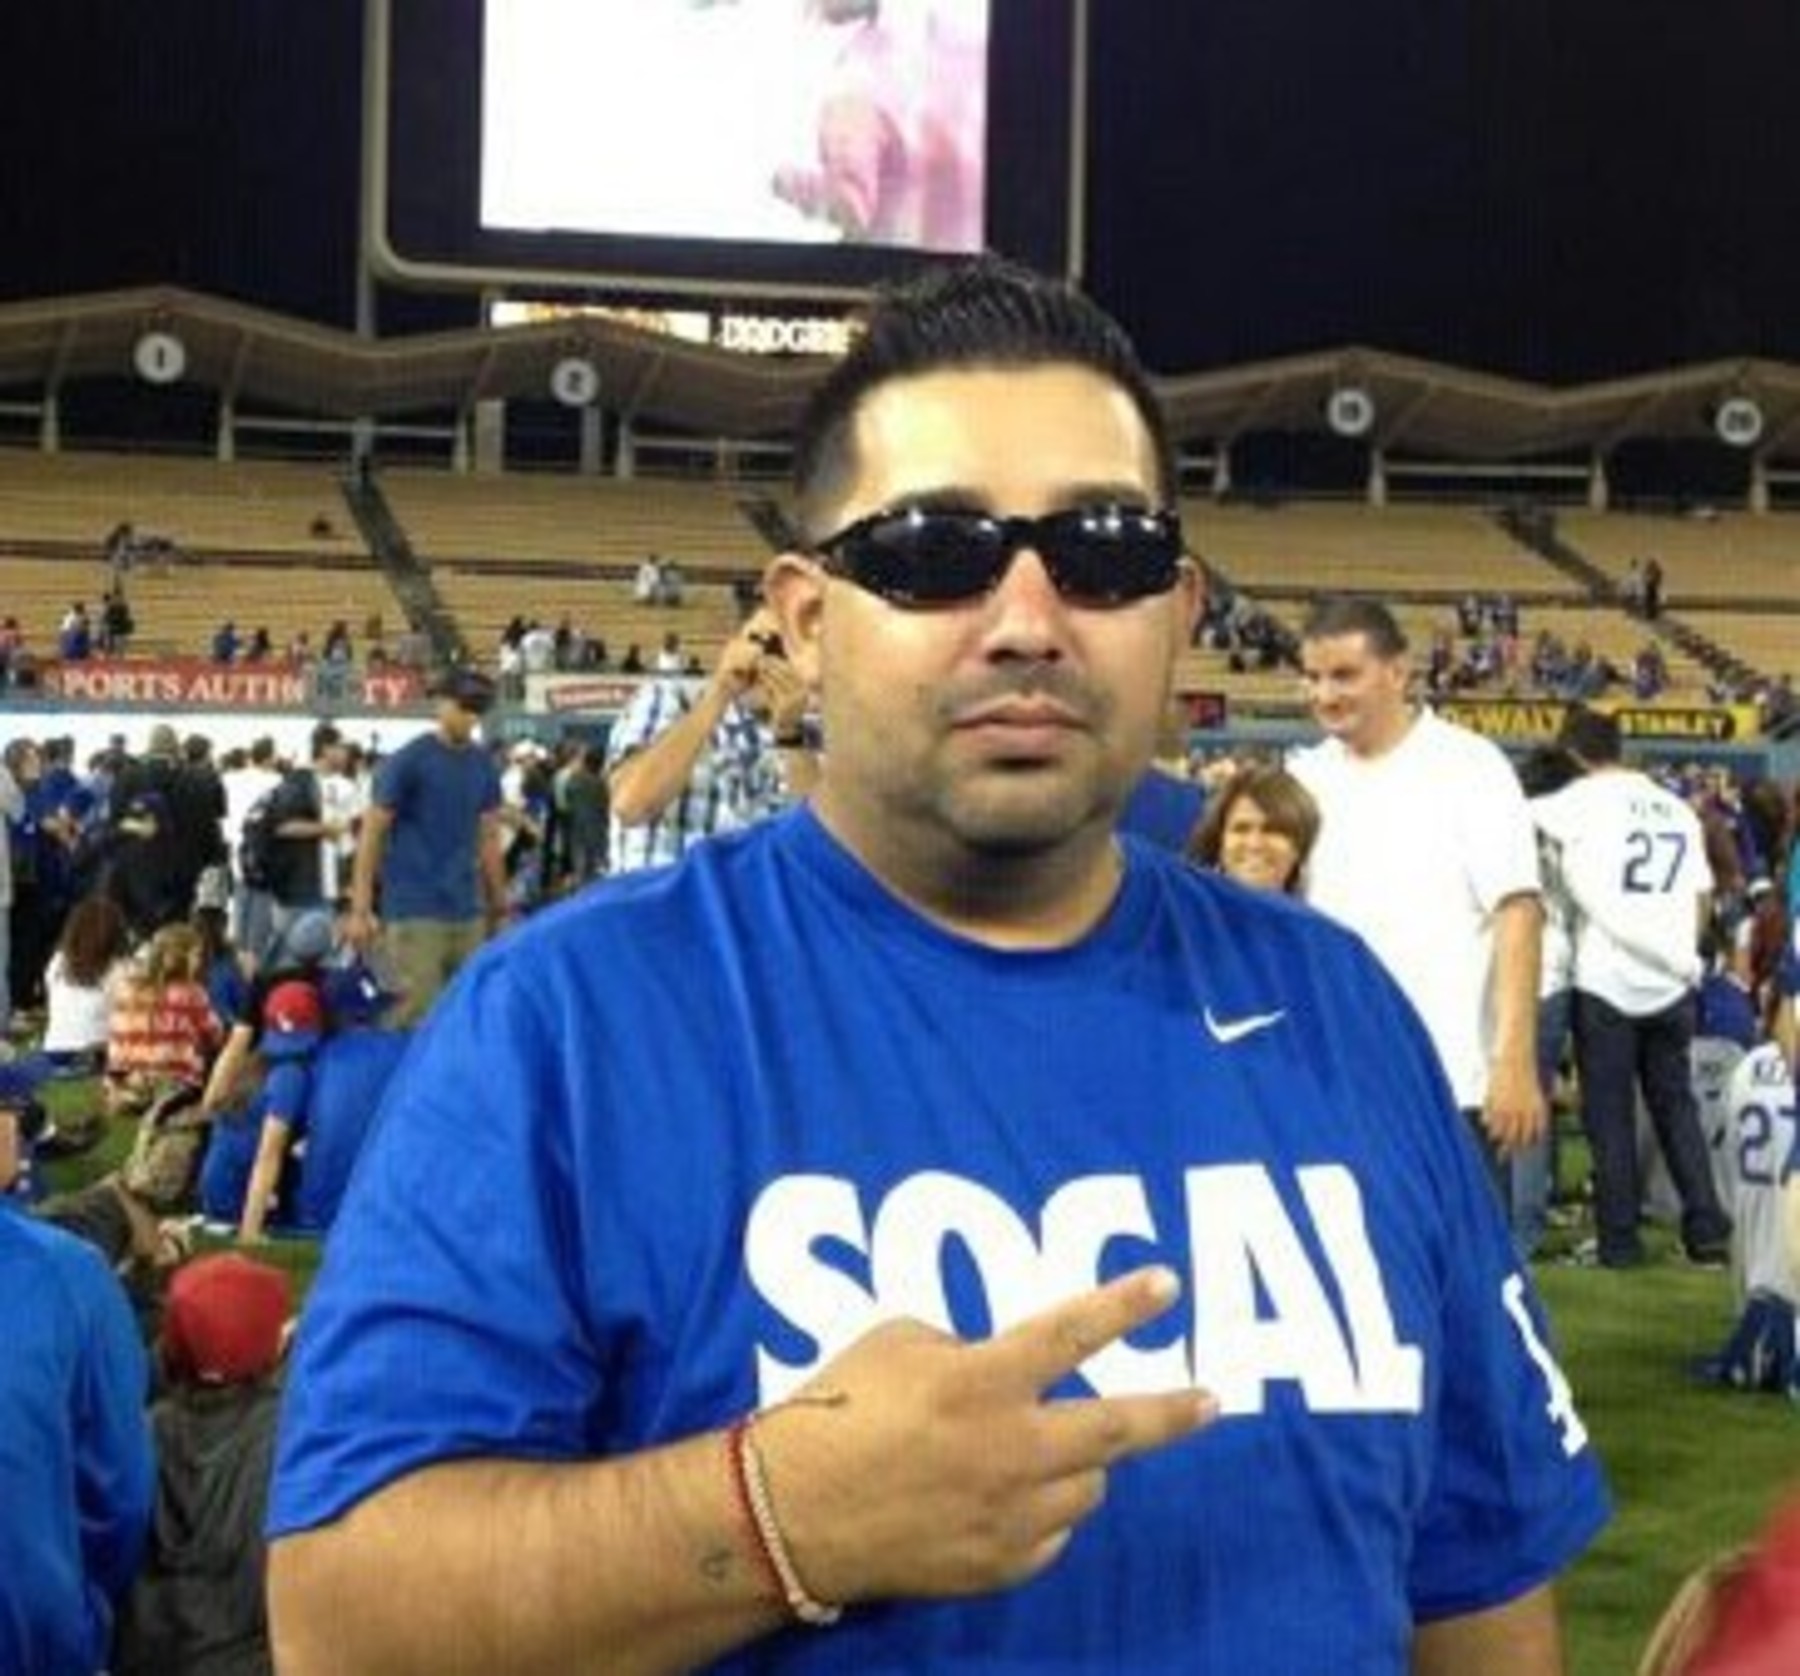 SoCal's biggest, most die-hard Dodgers fans are